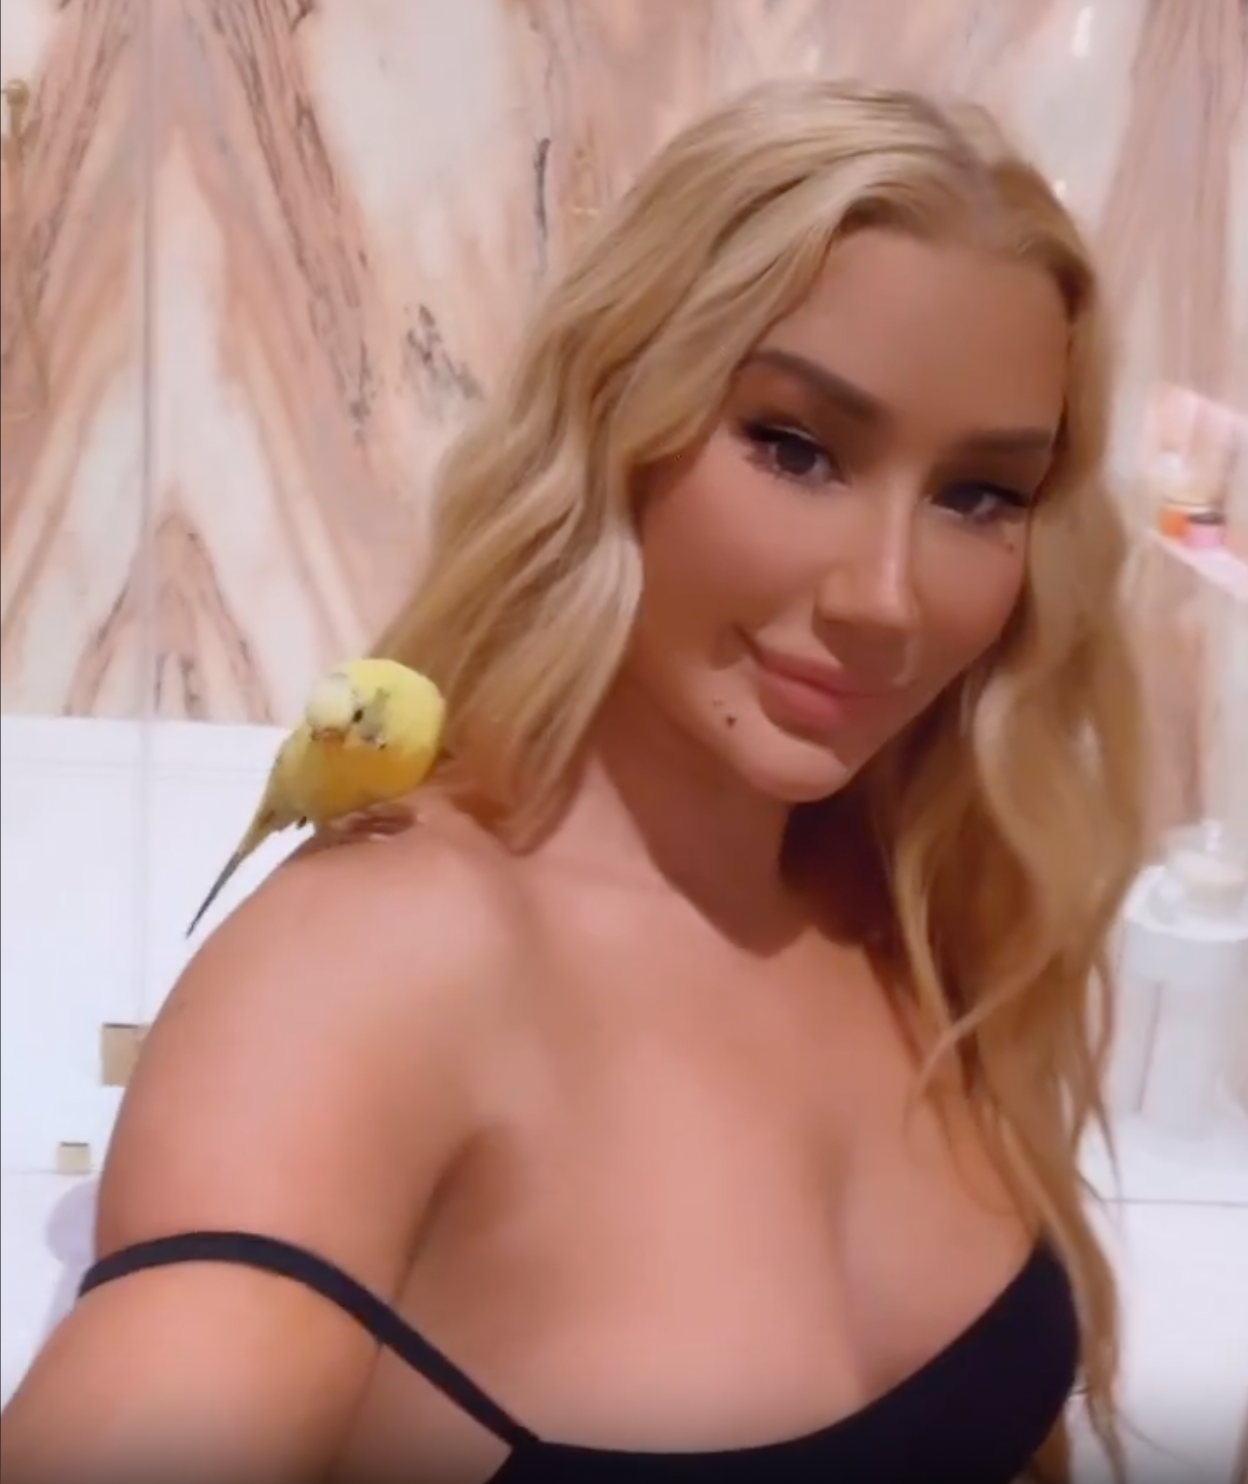 Iggy Azalea Reminds Fans Of Her Perfect Curves & Introduces Cute New Friend